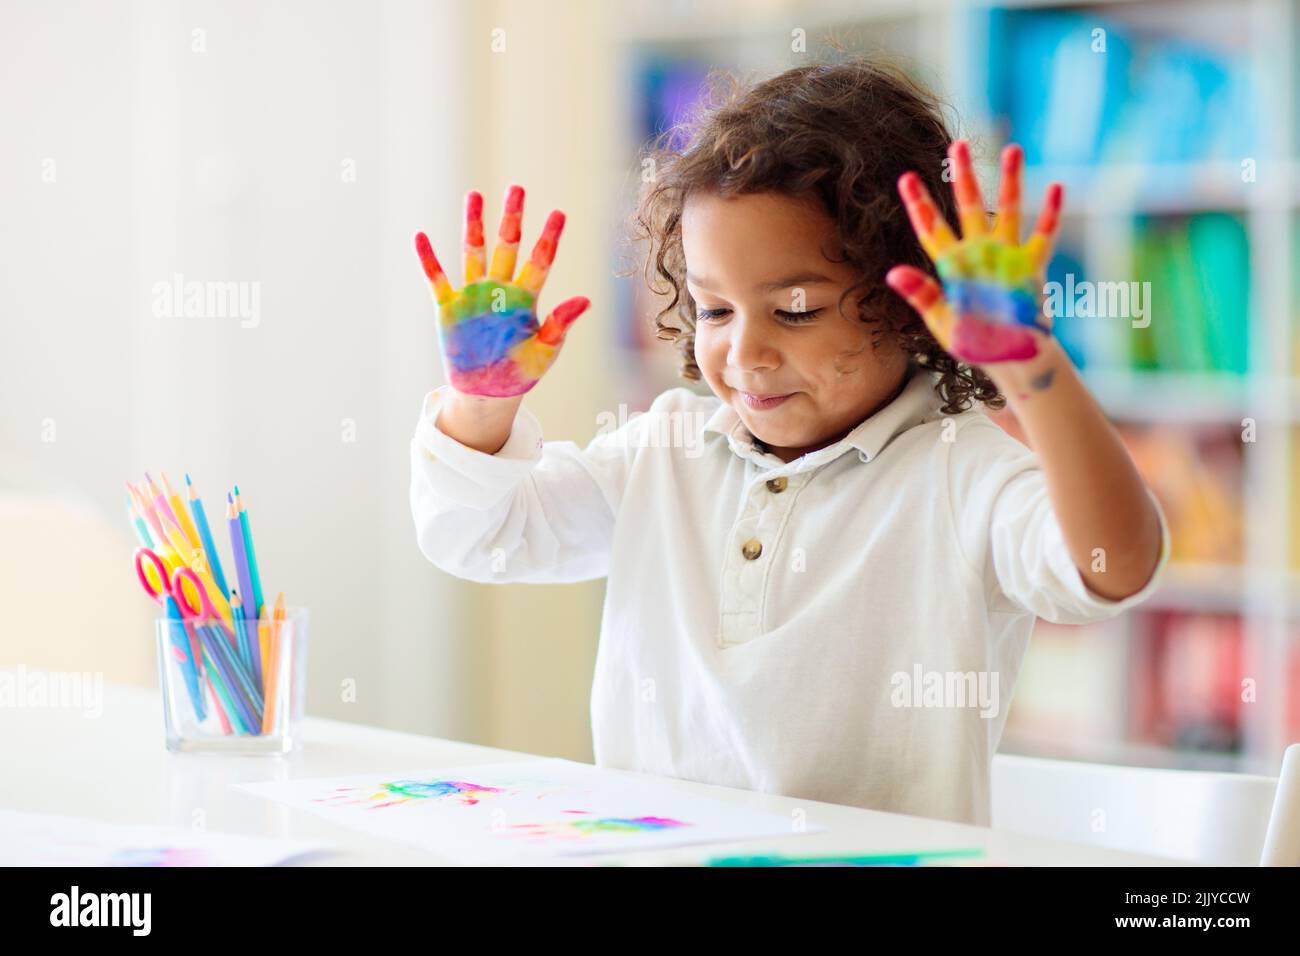 Child drawing rainbow. Paint on hands. Remote learning and online school art homework from home. Arts and crafts for kids. Stock Photo